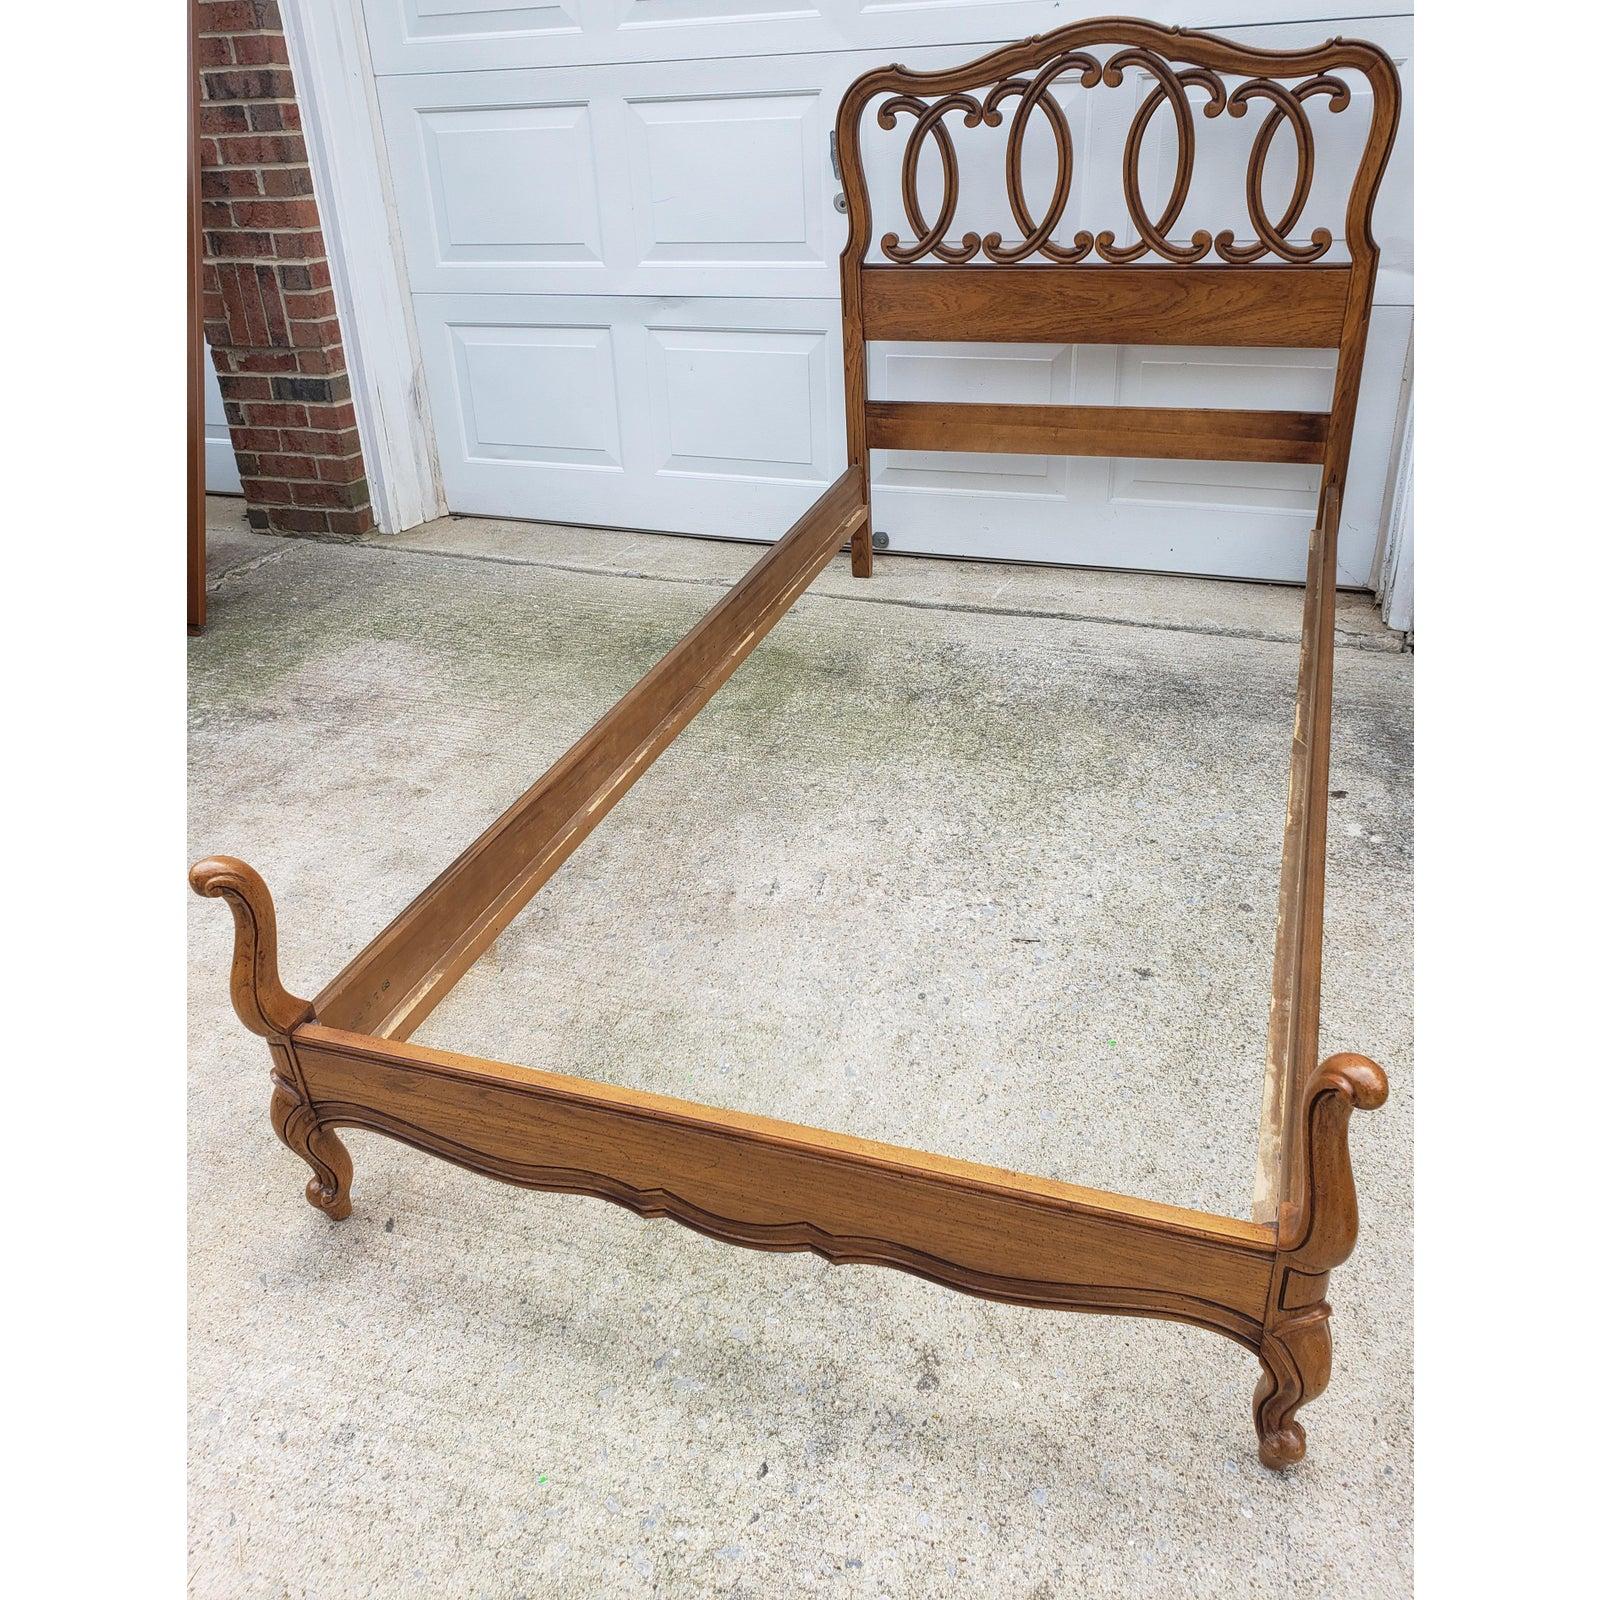 1956 Vintage Single Bedframe from Thomasville. The bed is in excellent condition. It measures 41